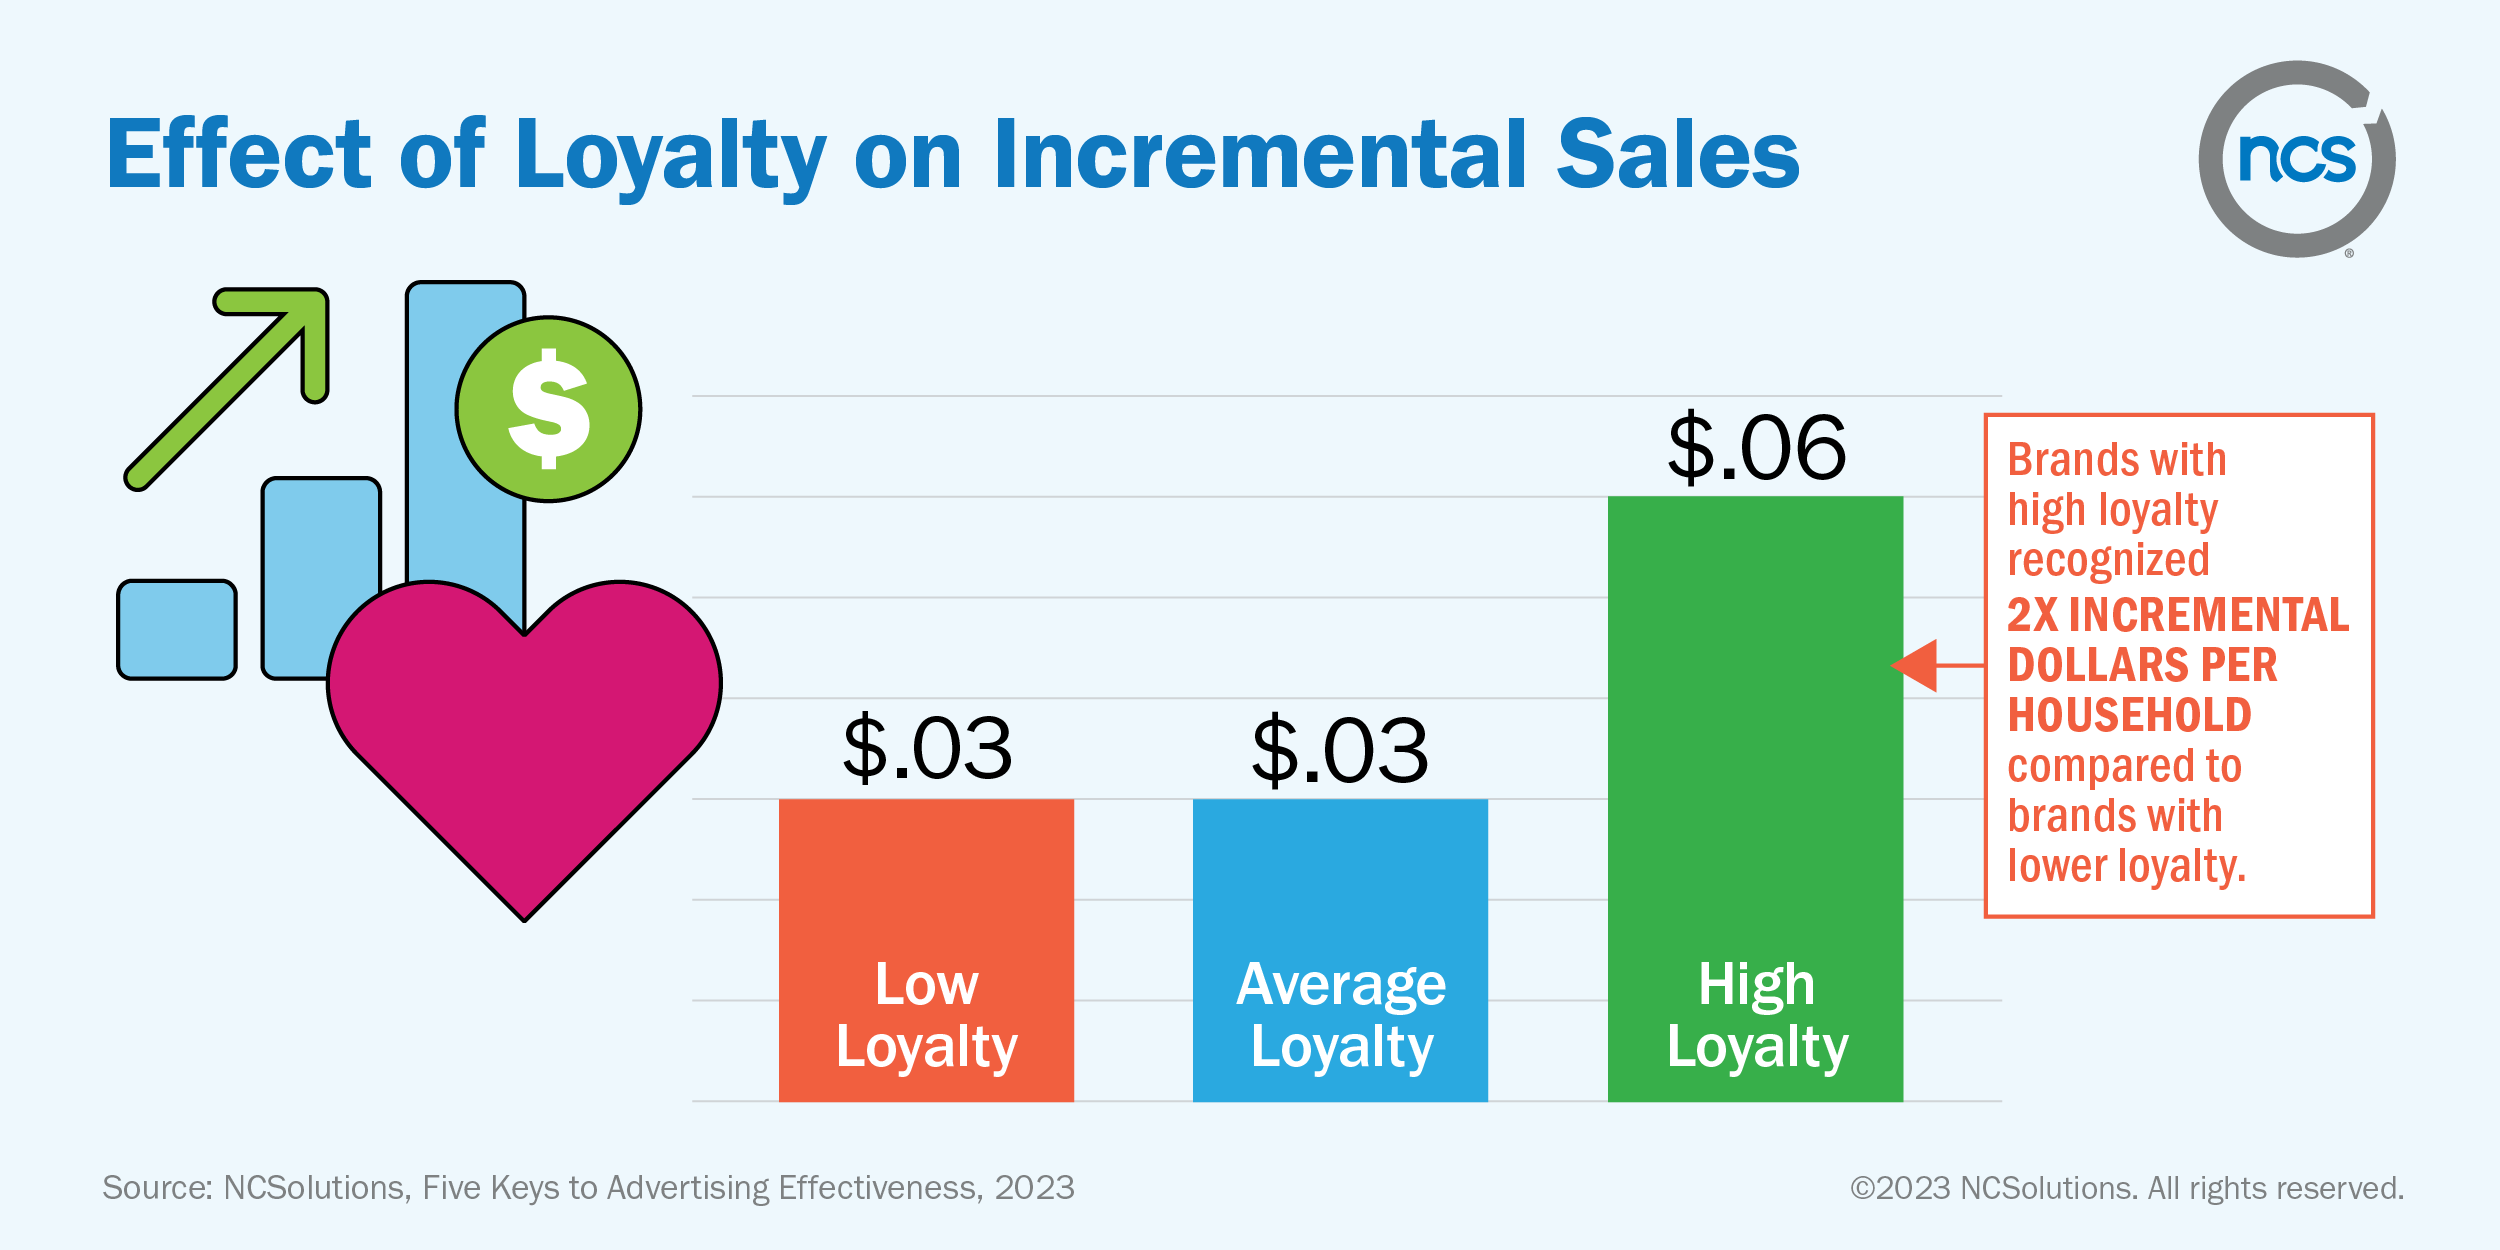 Brands with high loyalty recognized 2X incremental dollars per household compared to brands with lower loyalty.